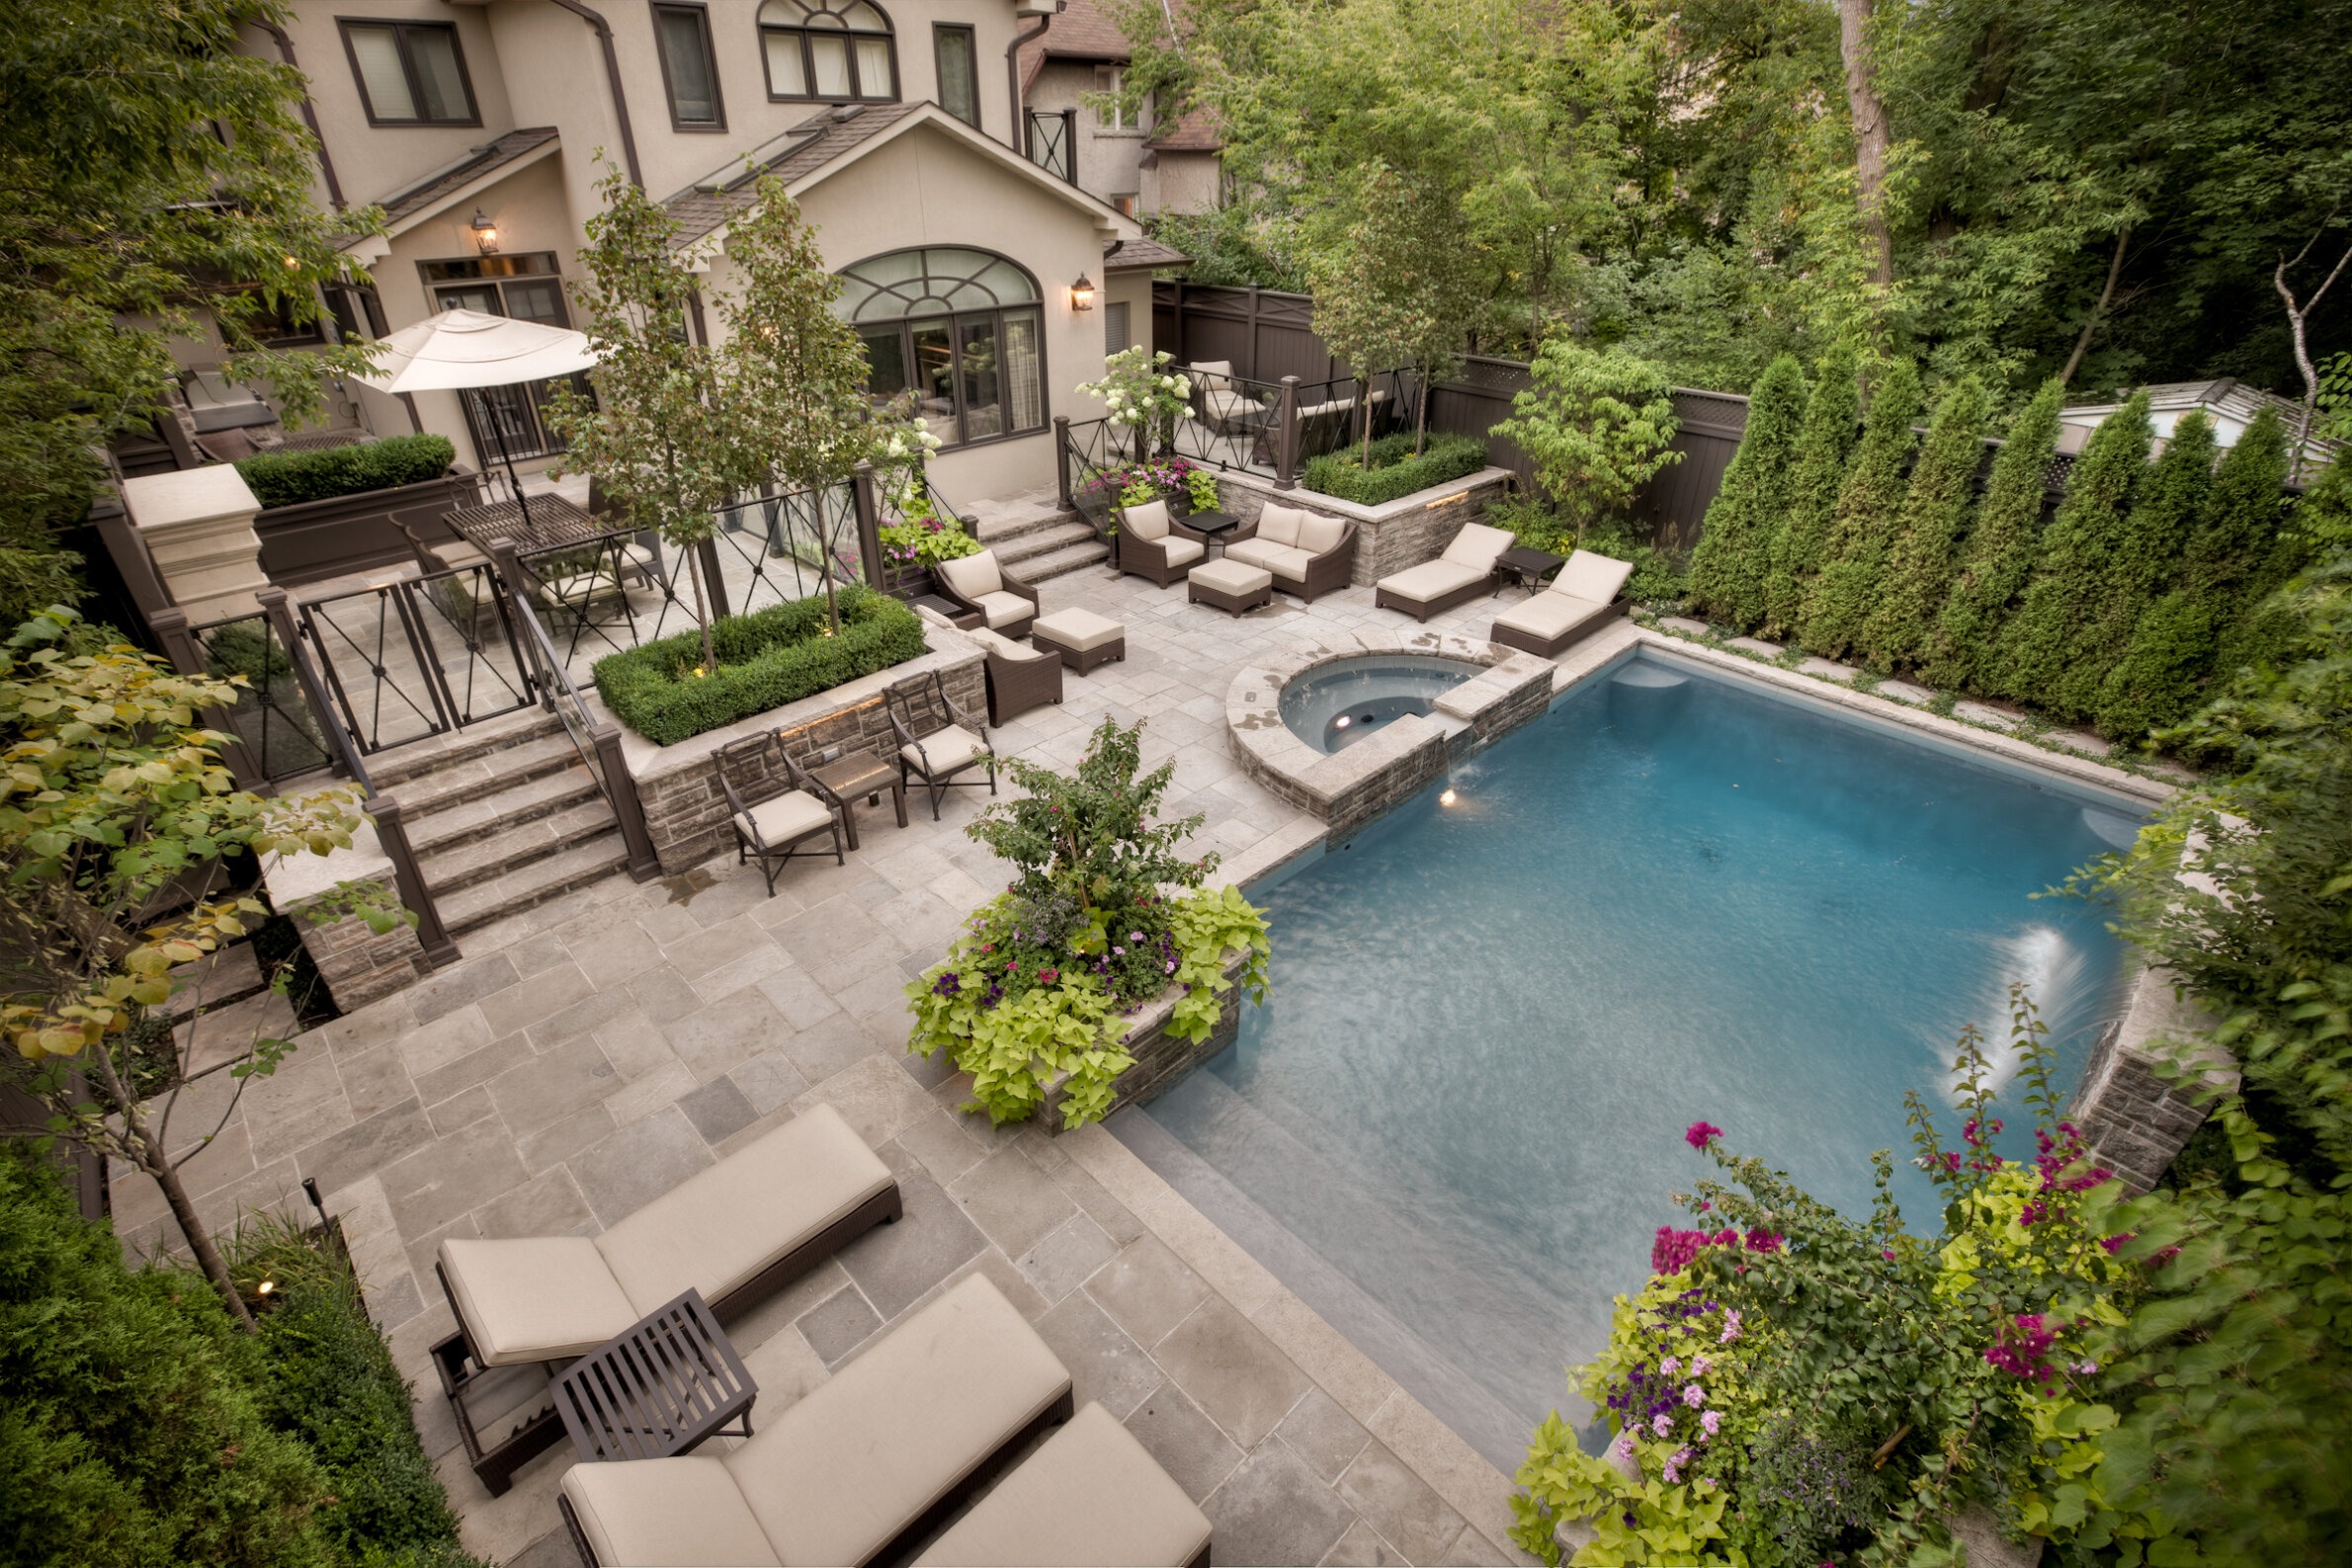 An upscale backyard with a swimming pool, hot tub, outdoor dining area, lounge chairs, stone patio, lush greenery, and a beige stucco house.